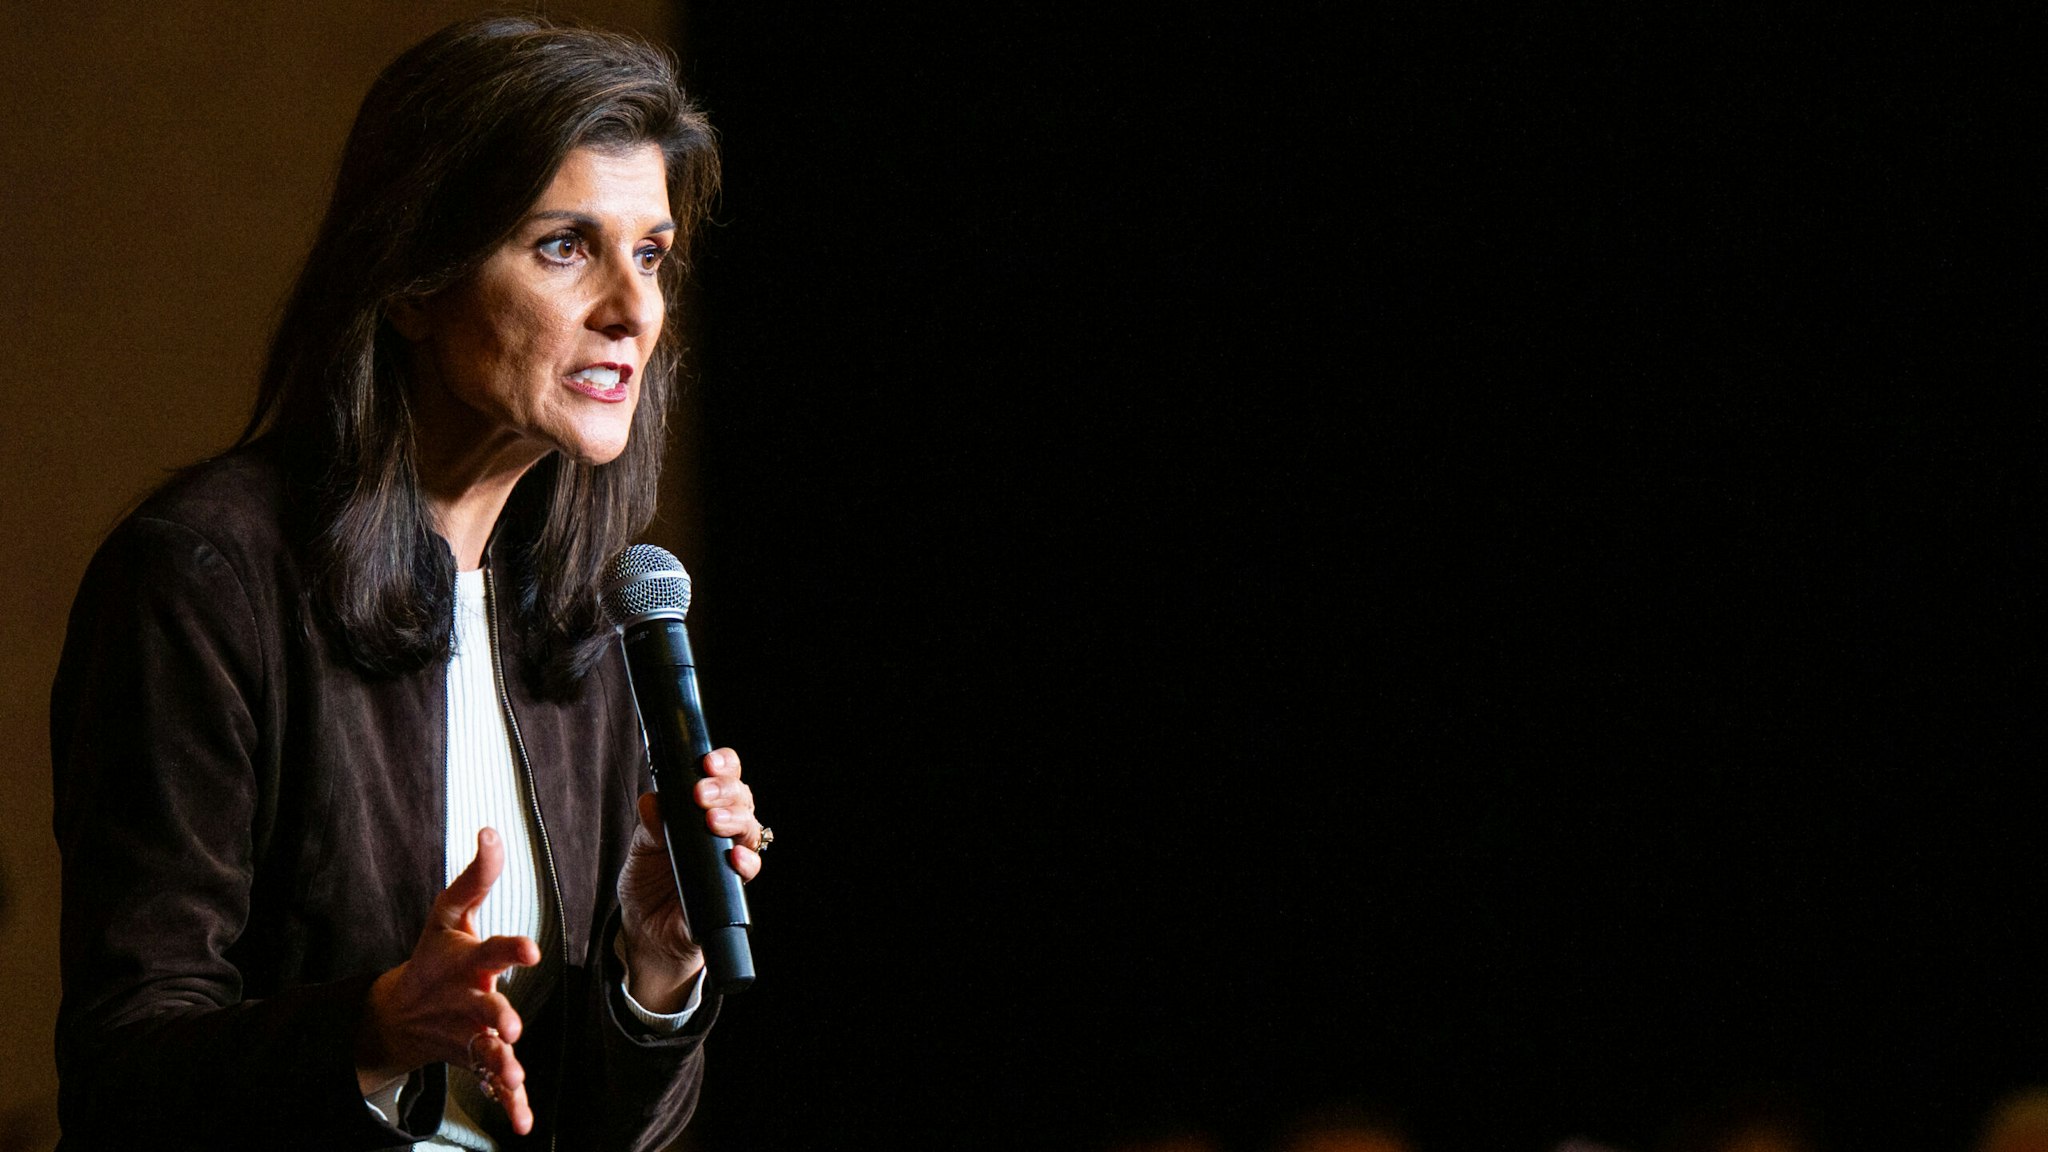 SPARTANBURG, SOUTH CAROLINA - FEBRUARY 05: Republican presidential candidate, former U.N. Ambassador Nikki Haley speaks during a campaign rally at the Indigo Hall and Events venue on February 05, 2024 in Spartanburg, South Carolina. The former South Carolina governor continues campaigning across her home state in the race against former President Donald Trump ahead of the state's Republican primary on February 24.